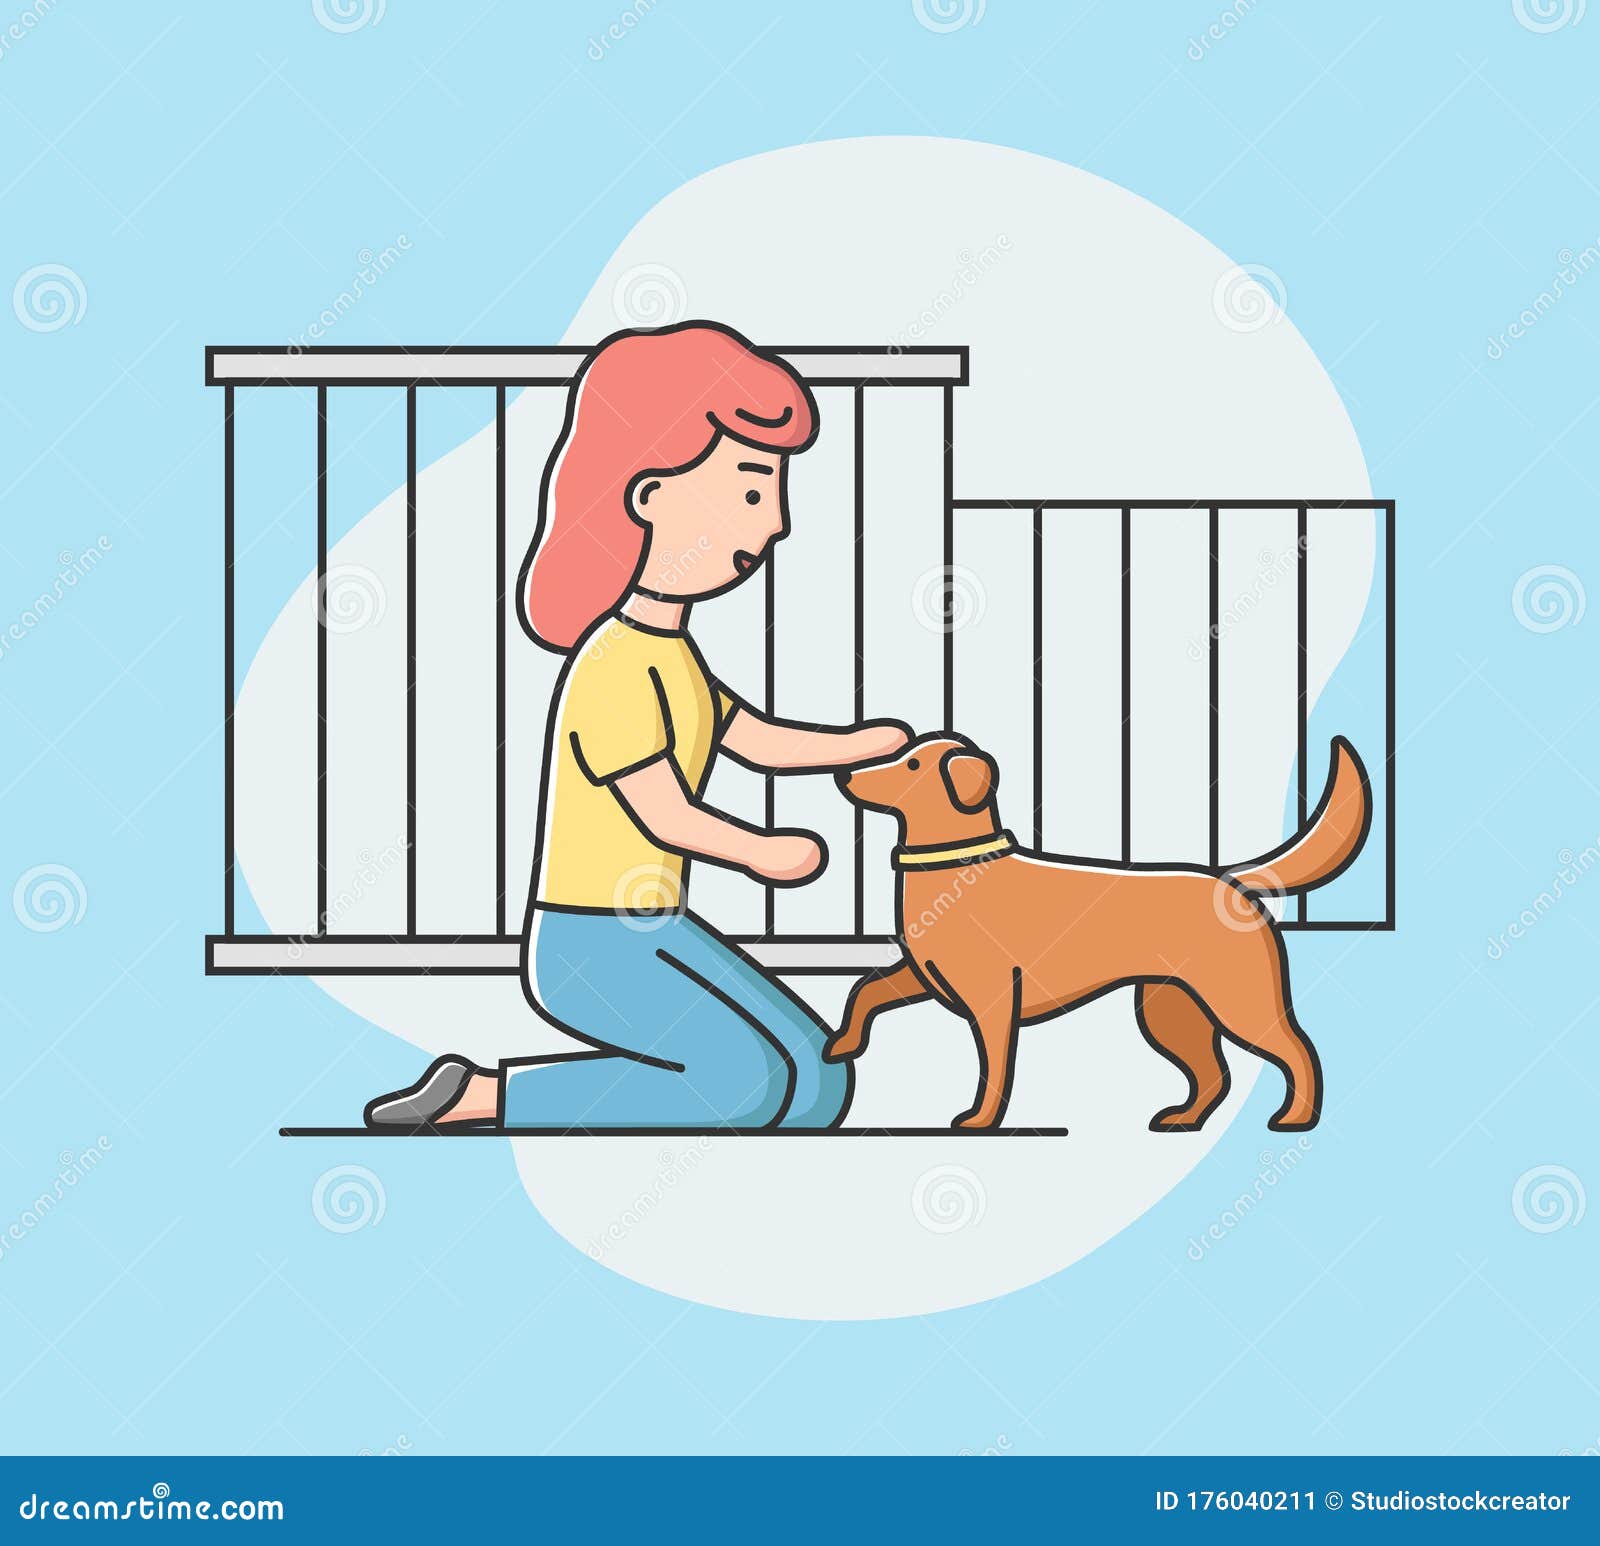 Concept of Animal Shelter for Stray Pets. Kind Woman Help Homeless Animals.  Girl Adopting Dog from Shelter Stock Vector - Illustration of hand, love:  176040211